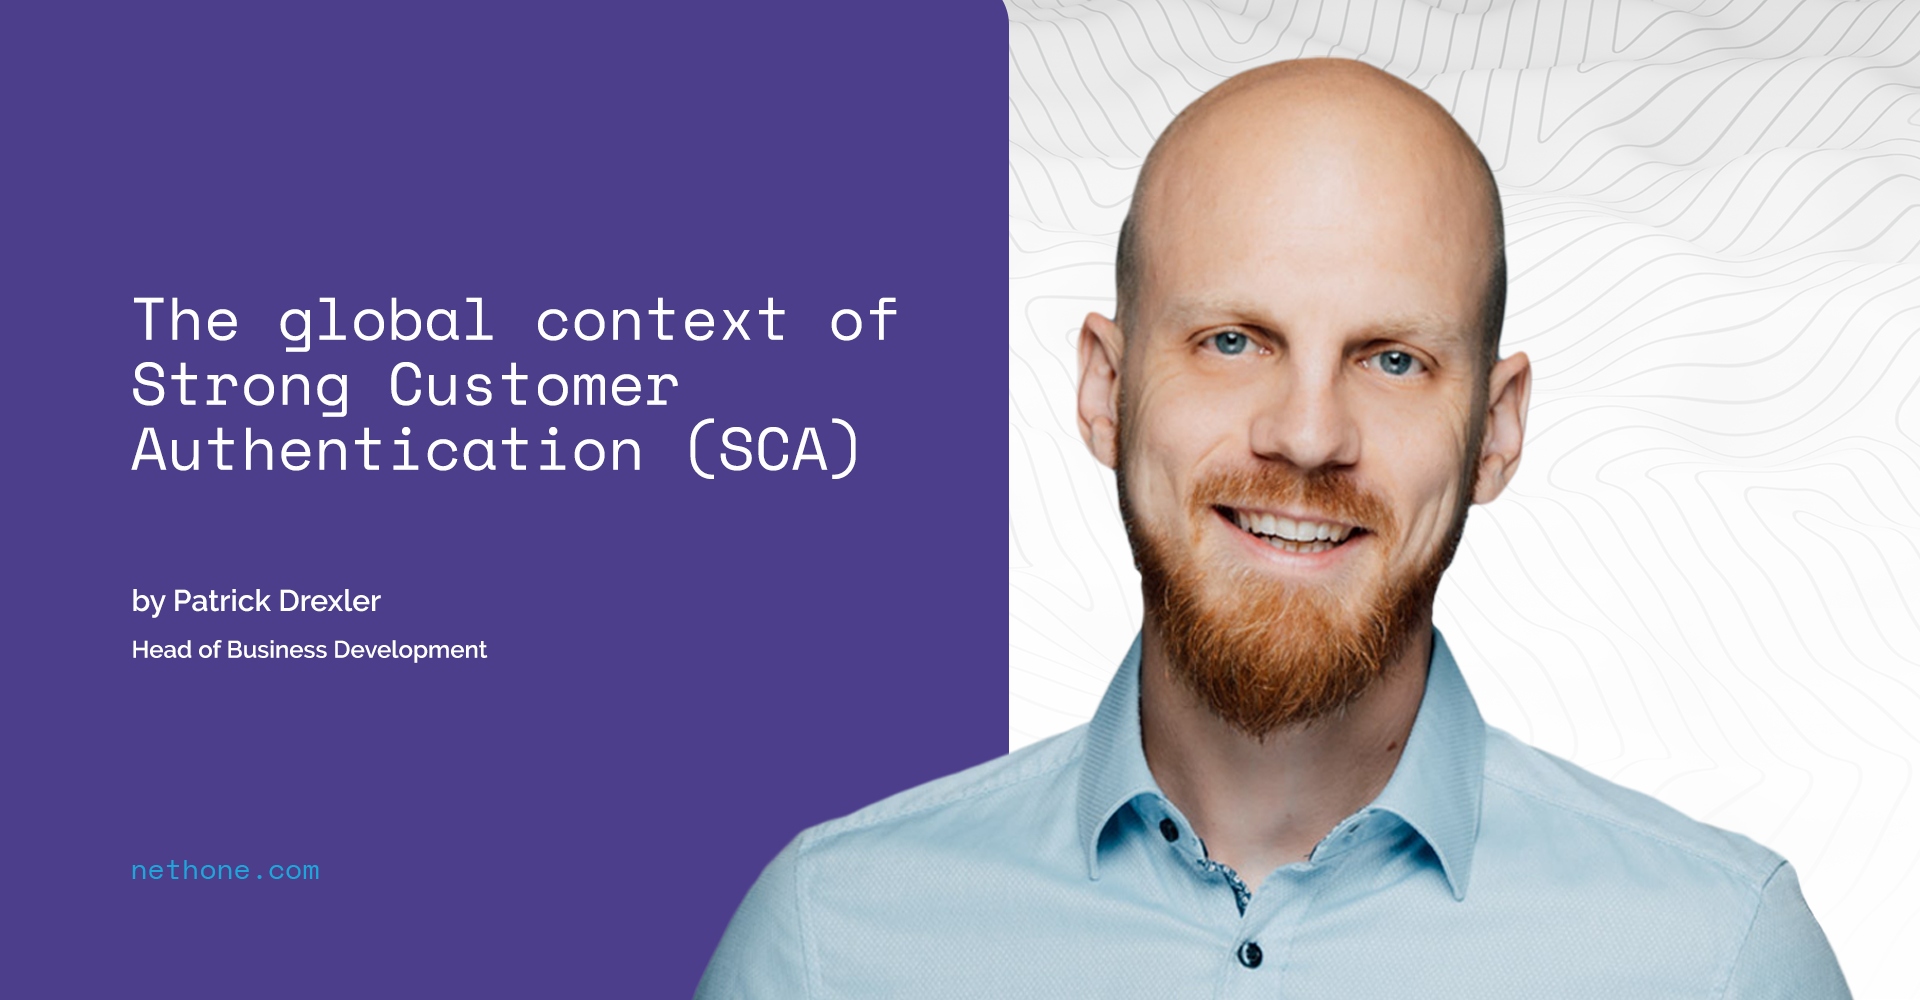 The global context of Strong Customer Authentication (SCA)